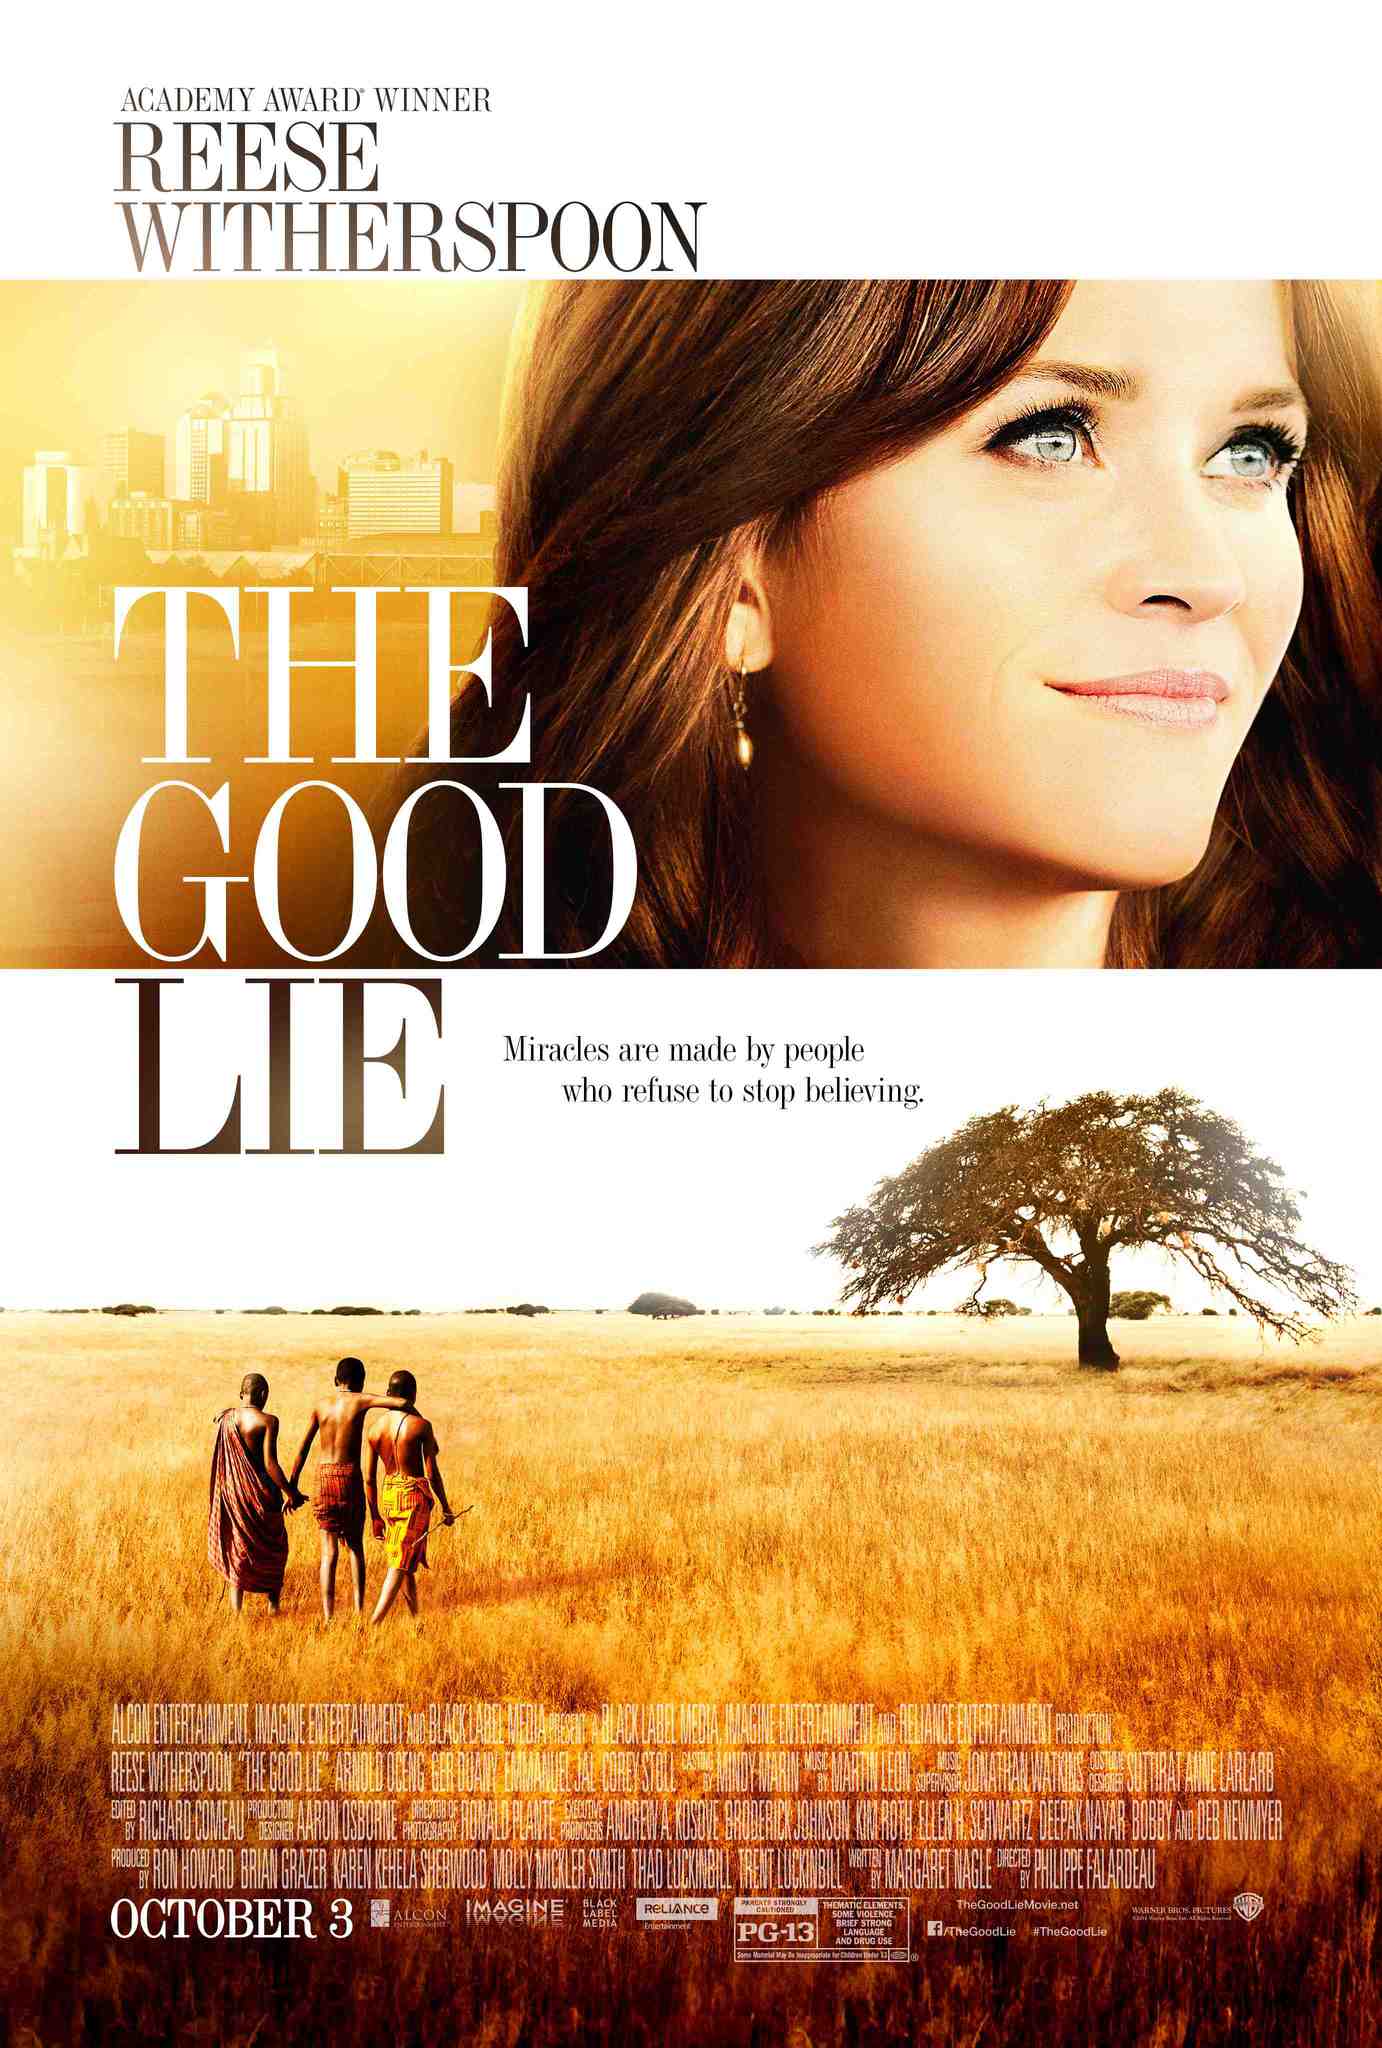 Image of the movie poster for The Good Lie featuring a photo of Reese Witherspoon and 3 people in a field with a distant tree. 